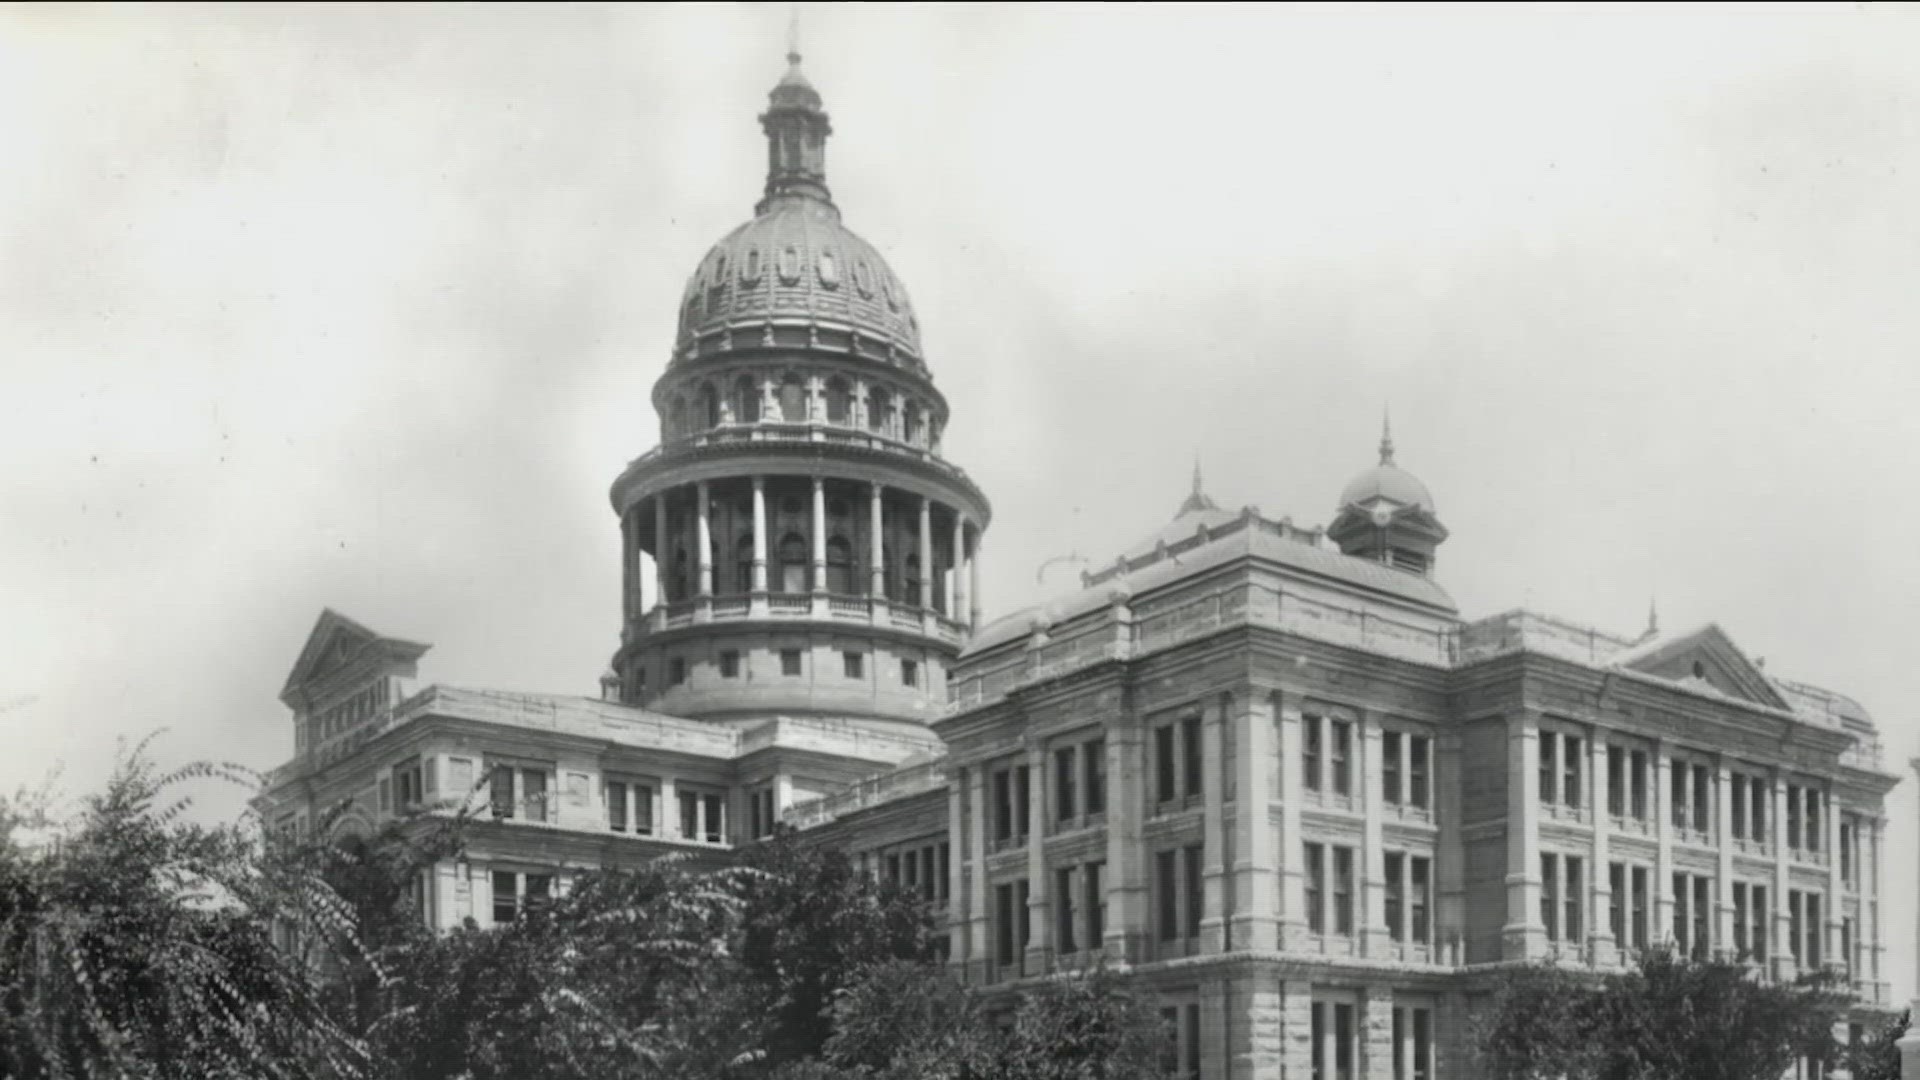 While the story of Robert Love's death has faded into memory, legend has it that his "ghost" is said to still wander the floors of the Texas Capitol late at night.